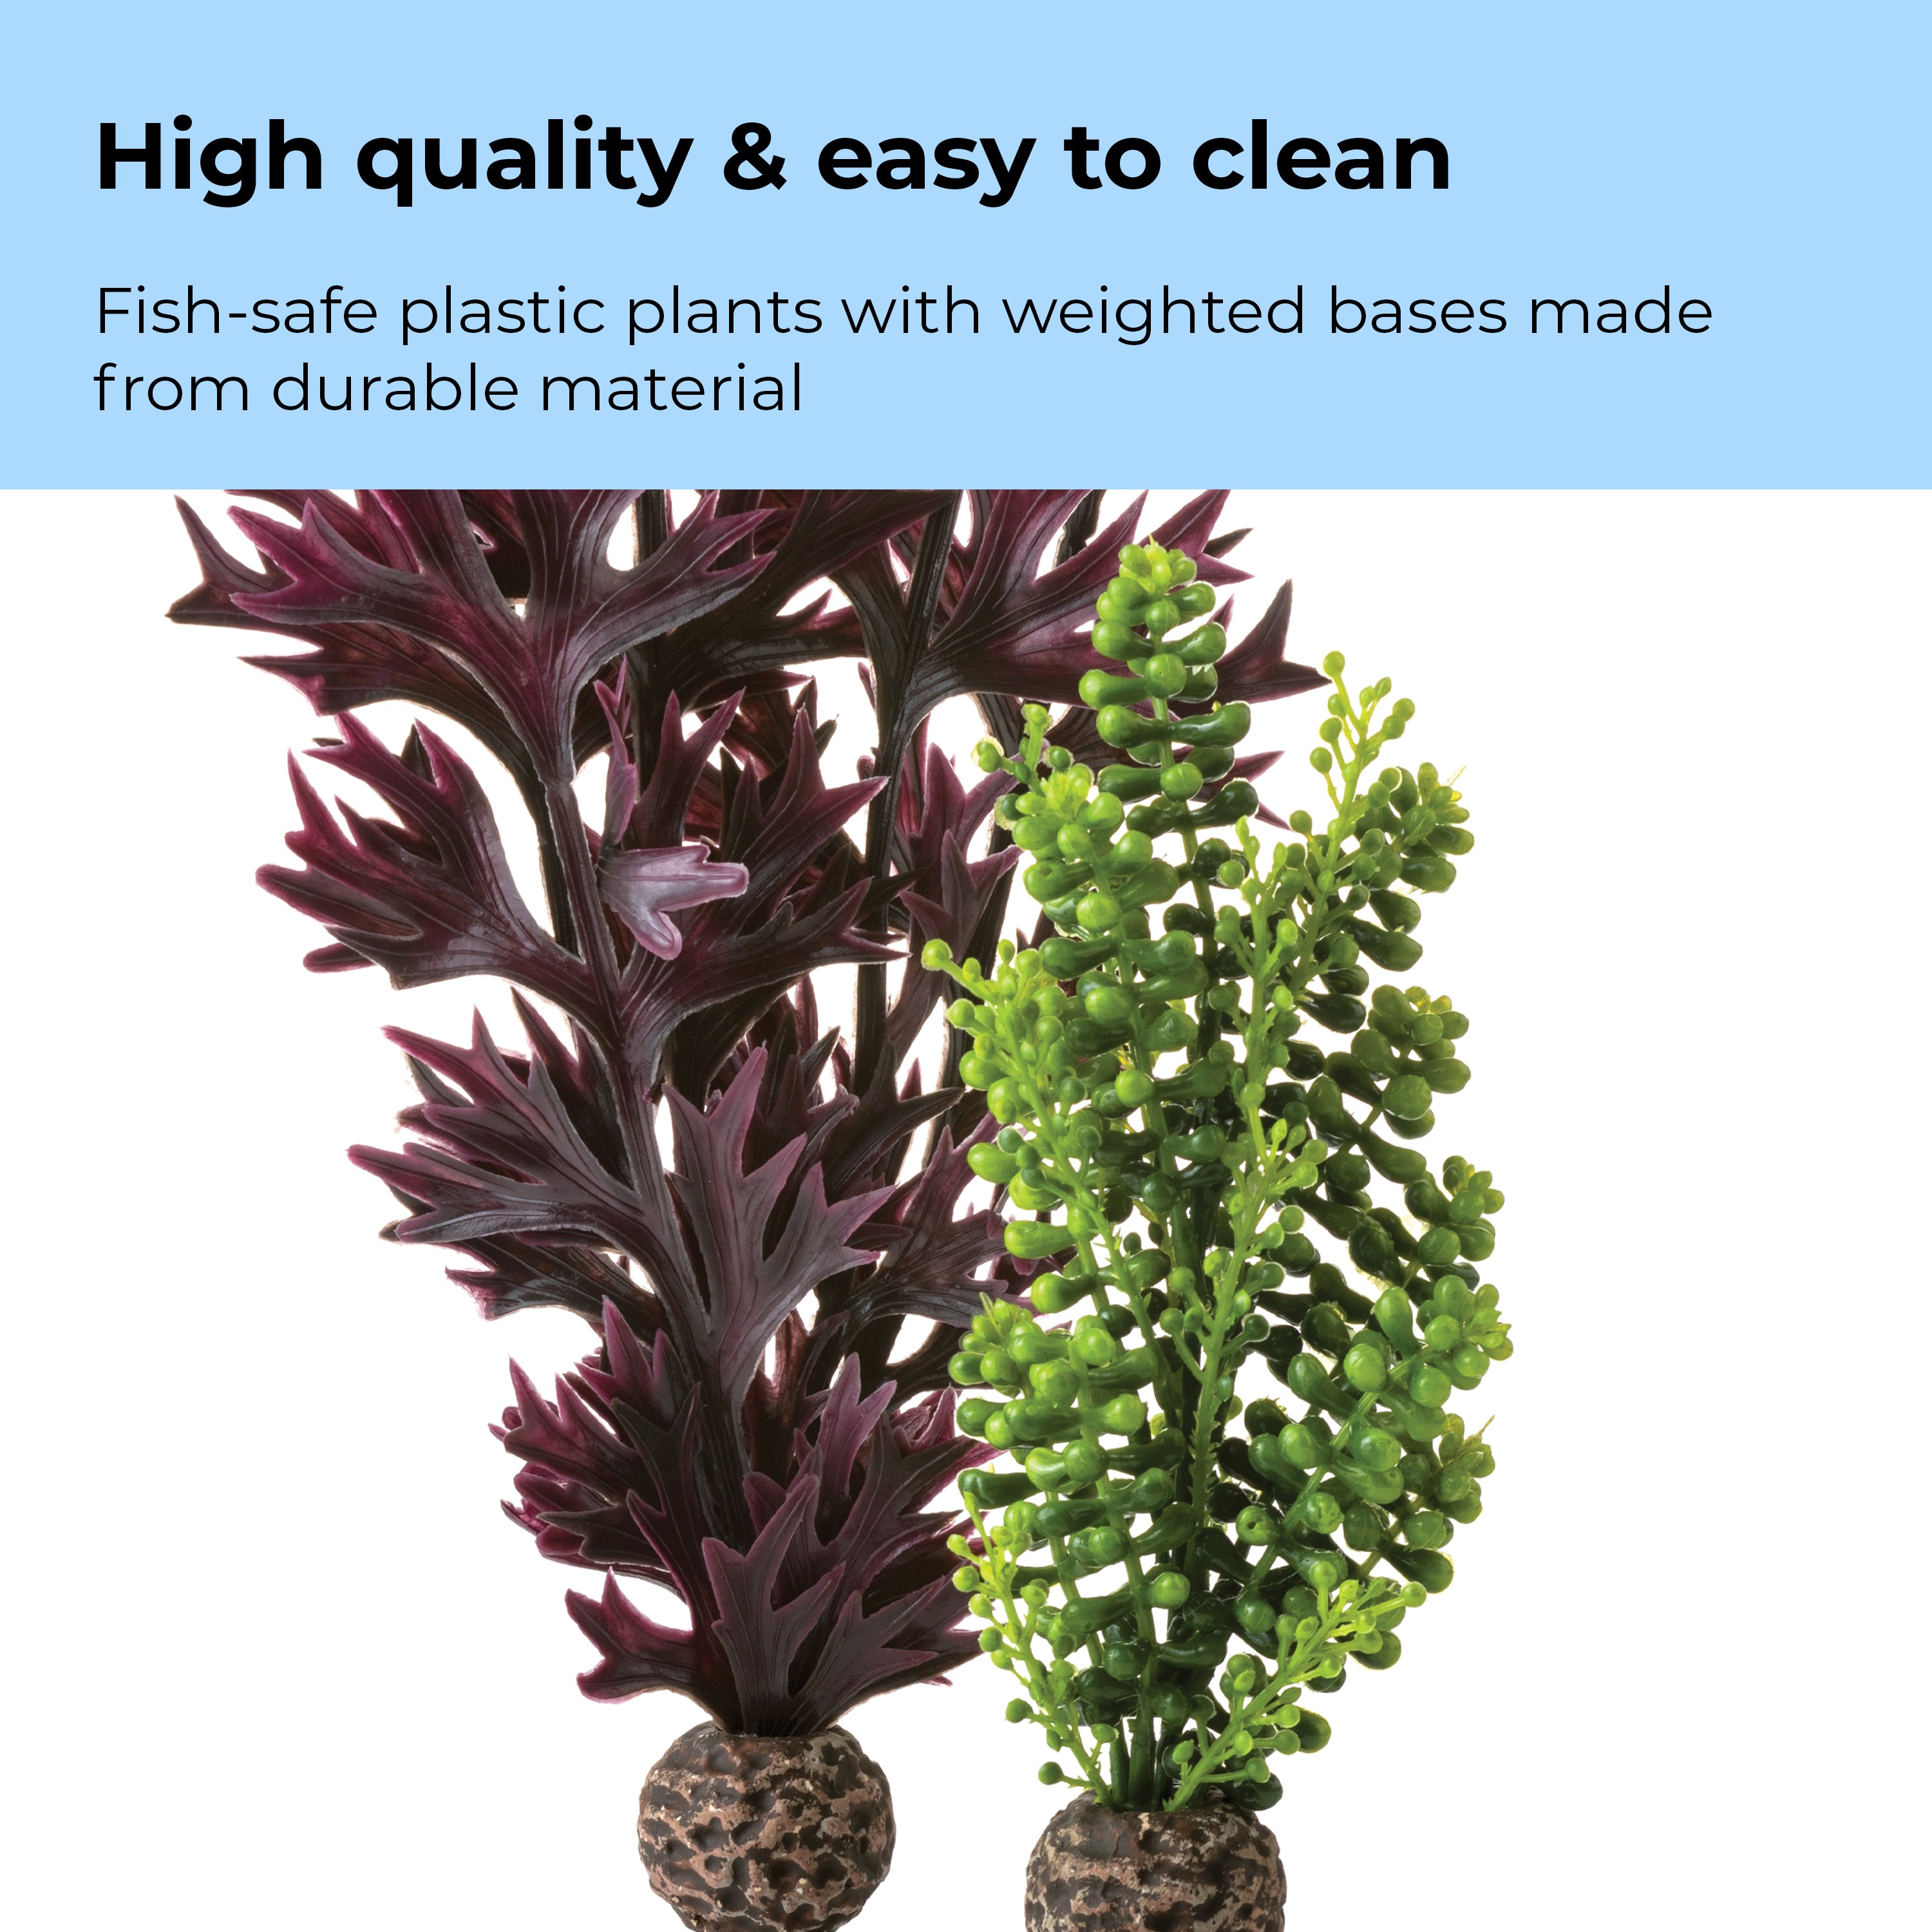 Olive Green Seapearls & Kelp Plant Set, medium - High quality & easy to clean